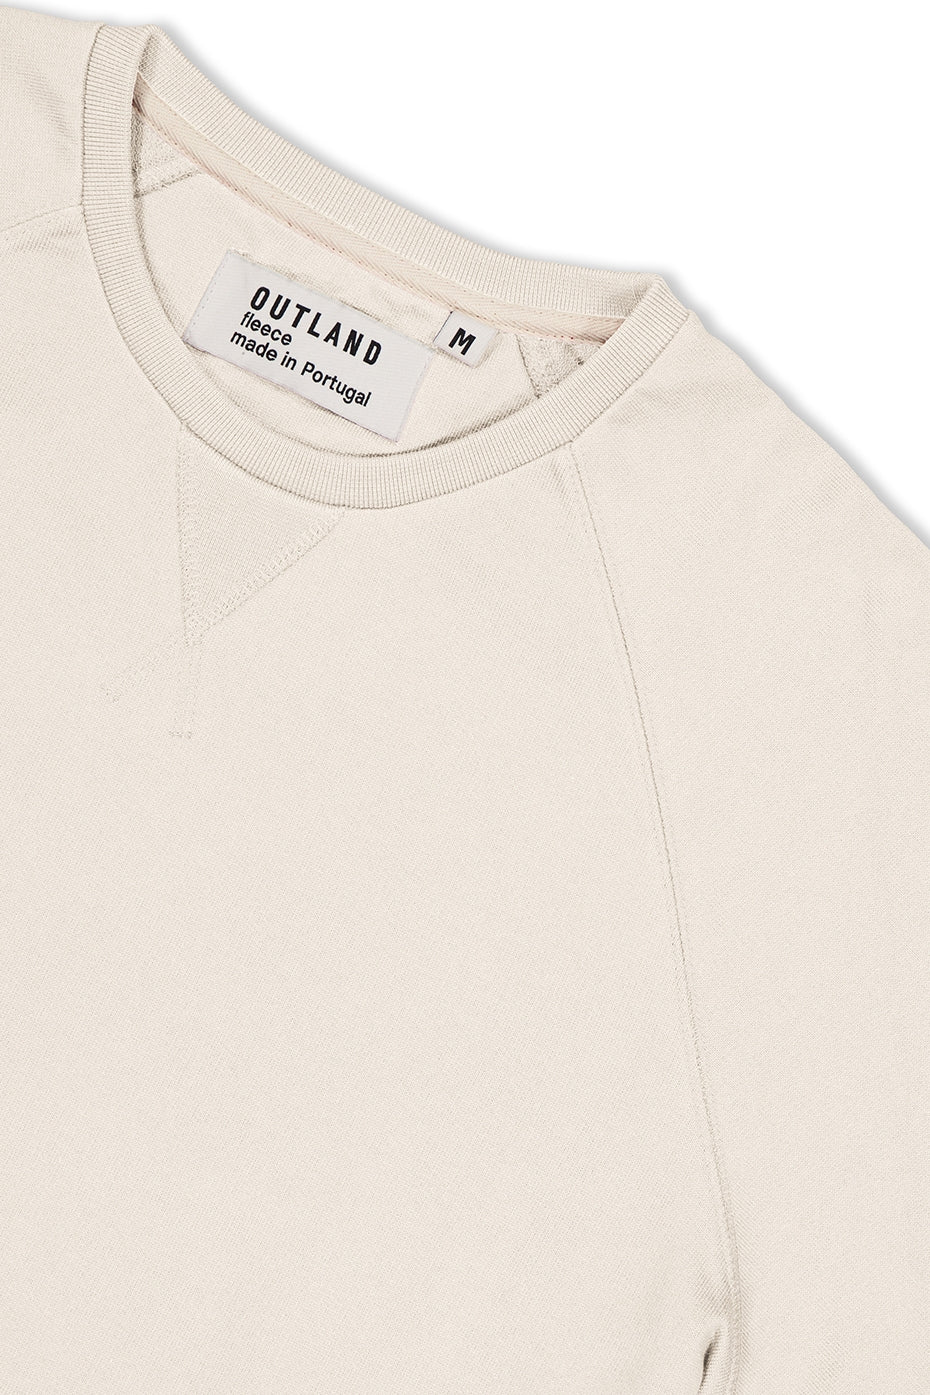 Off White Boxing Short Sleeve Sweater